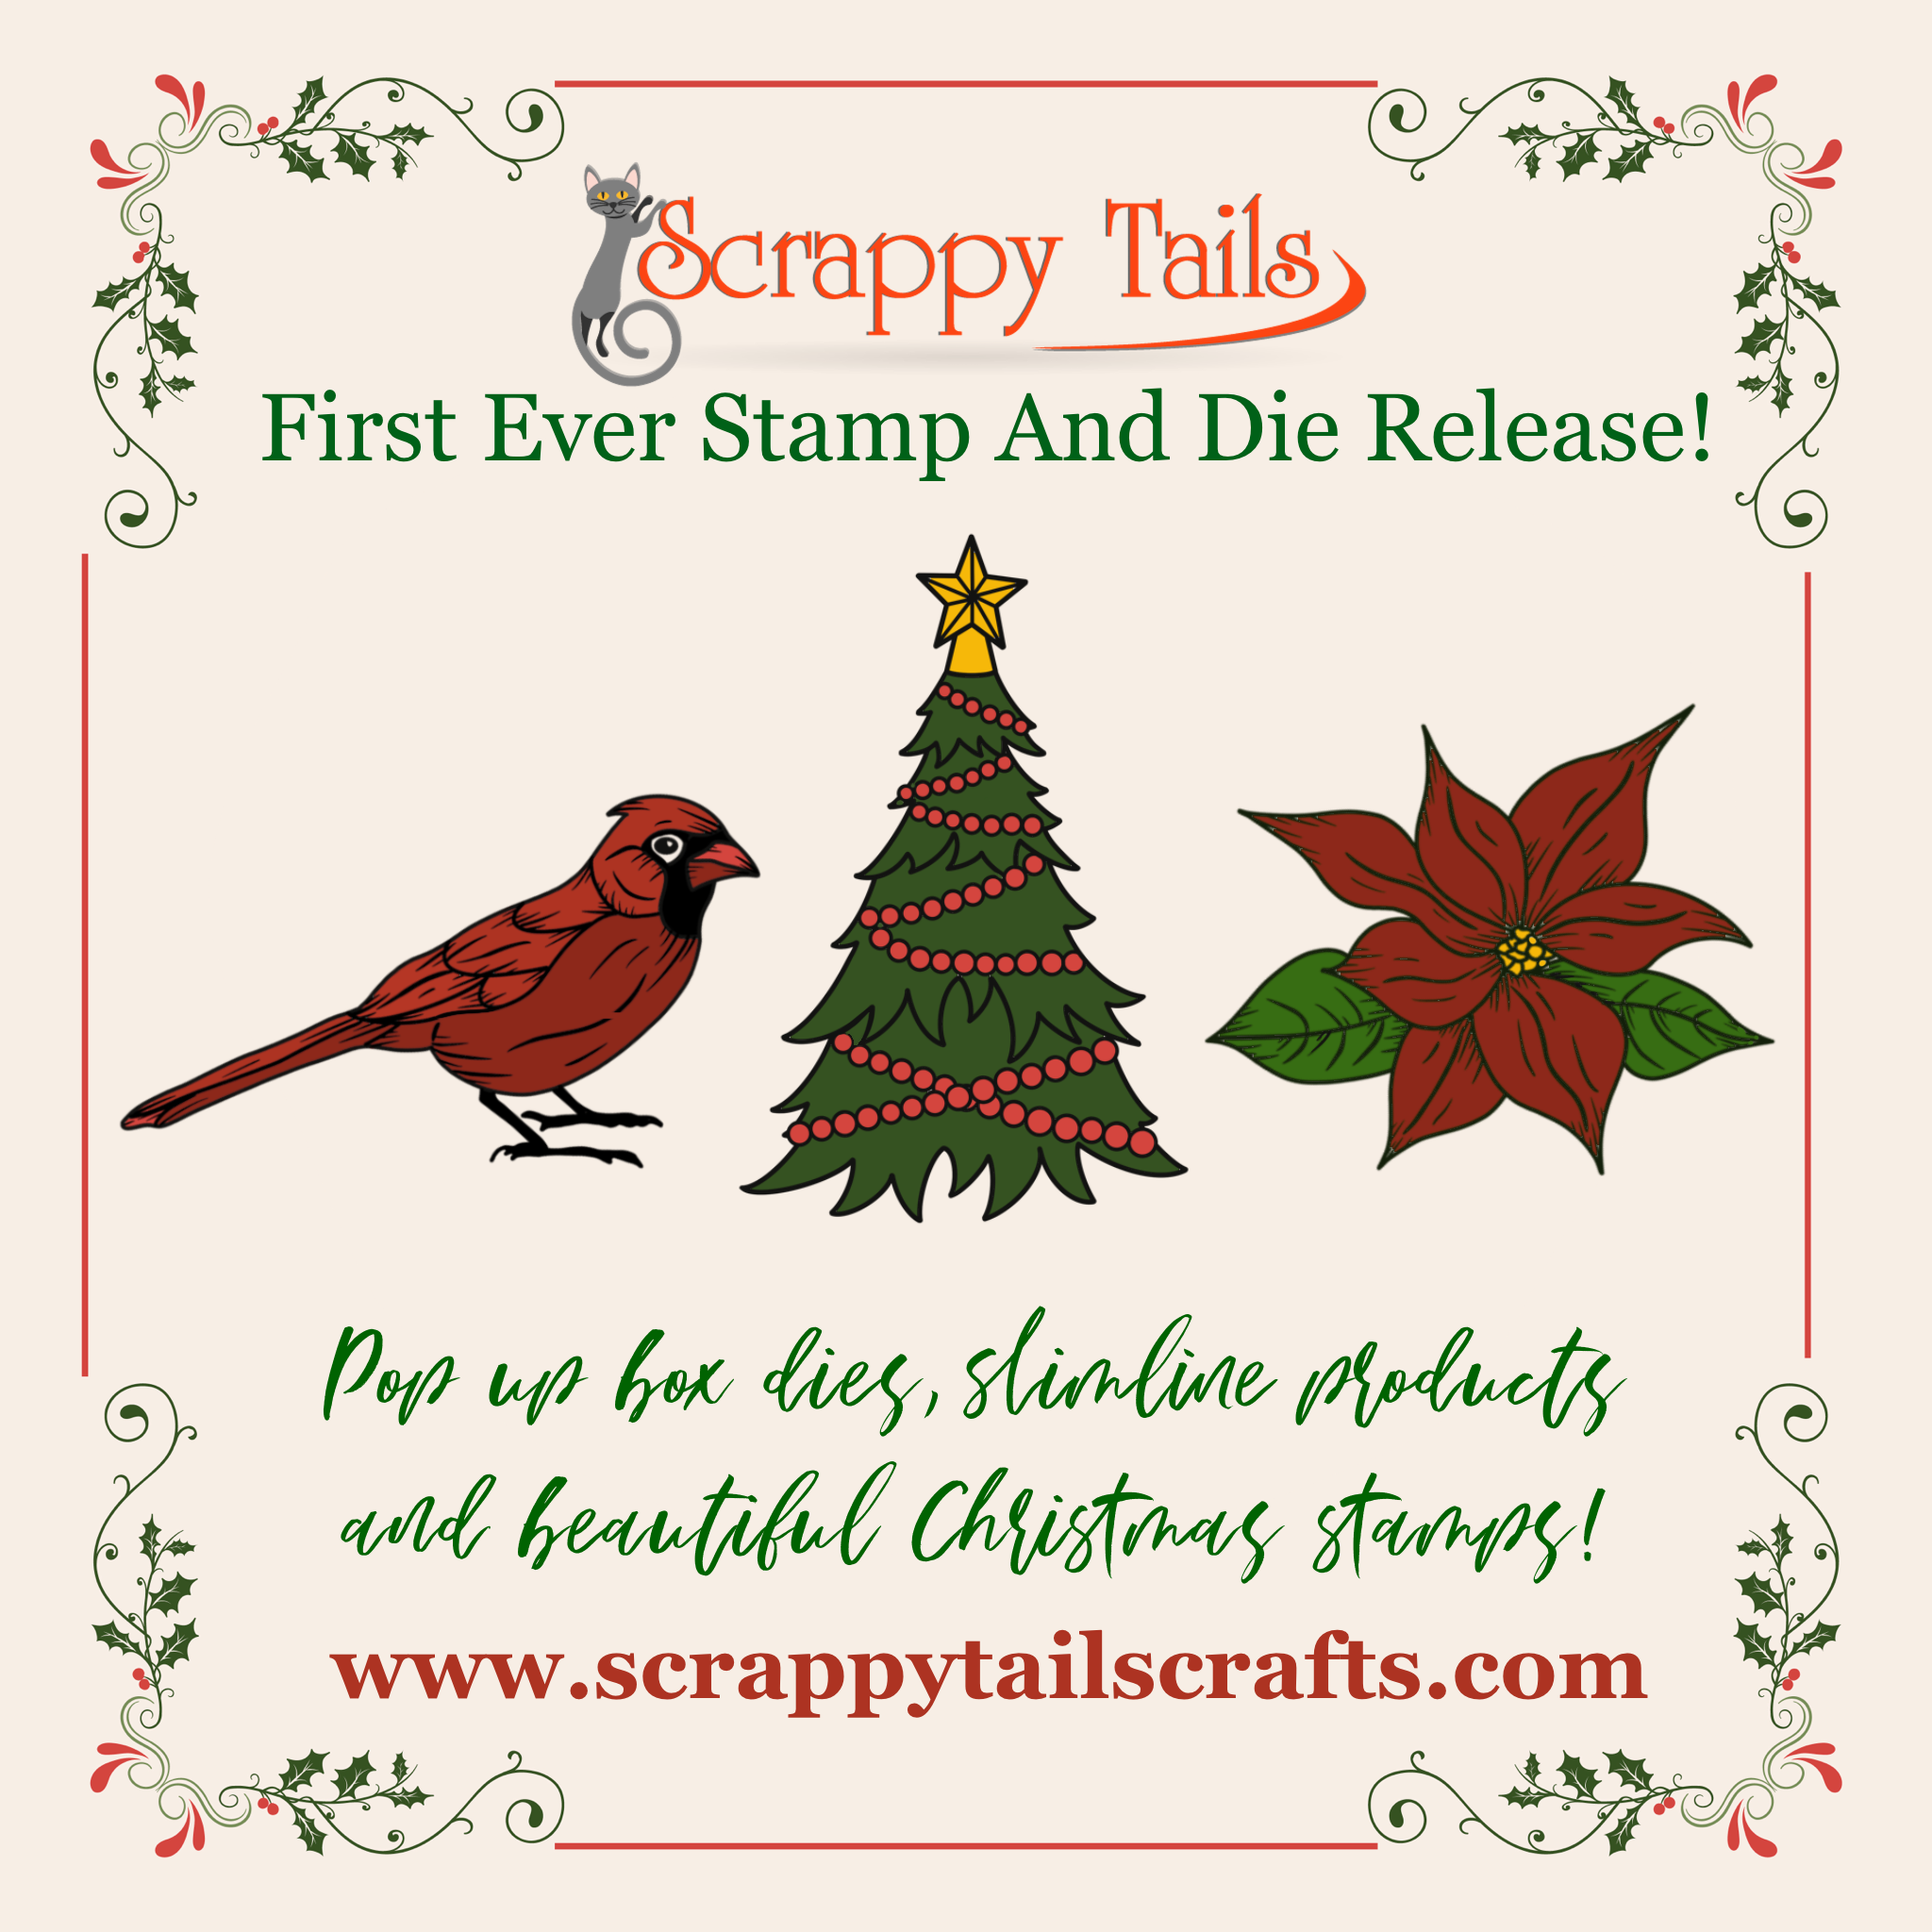 Scrappy Tails Crafts First Ever Stamp & Die Release